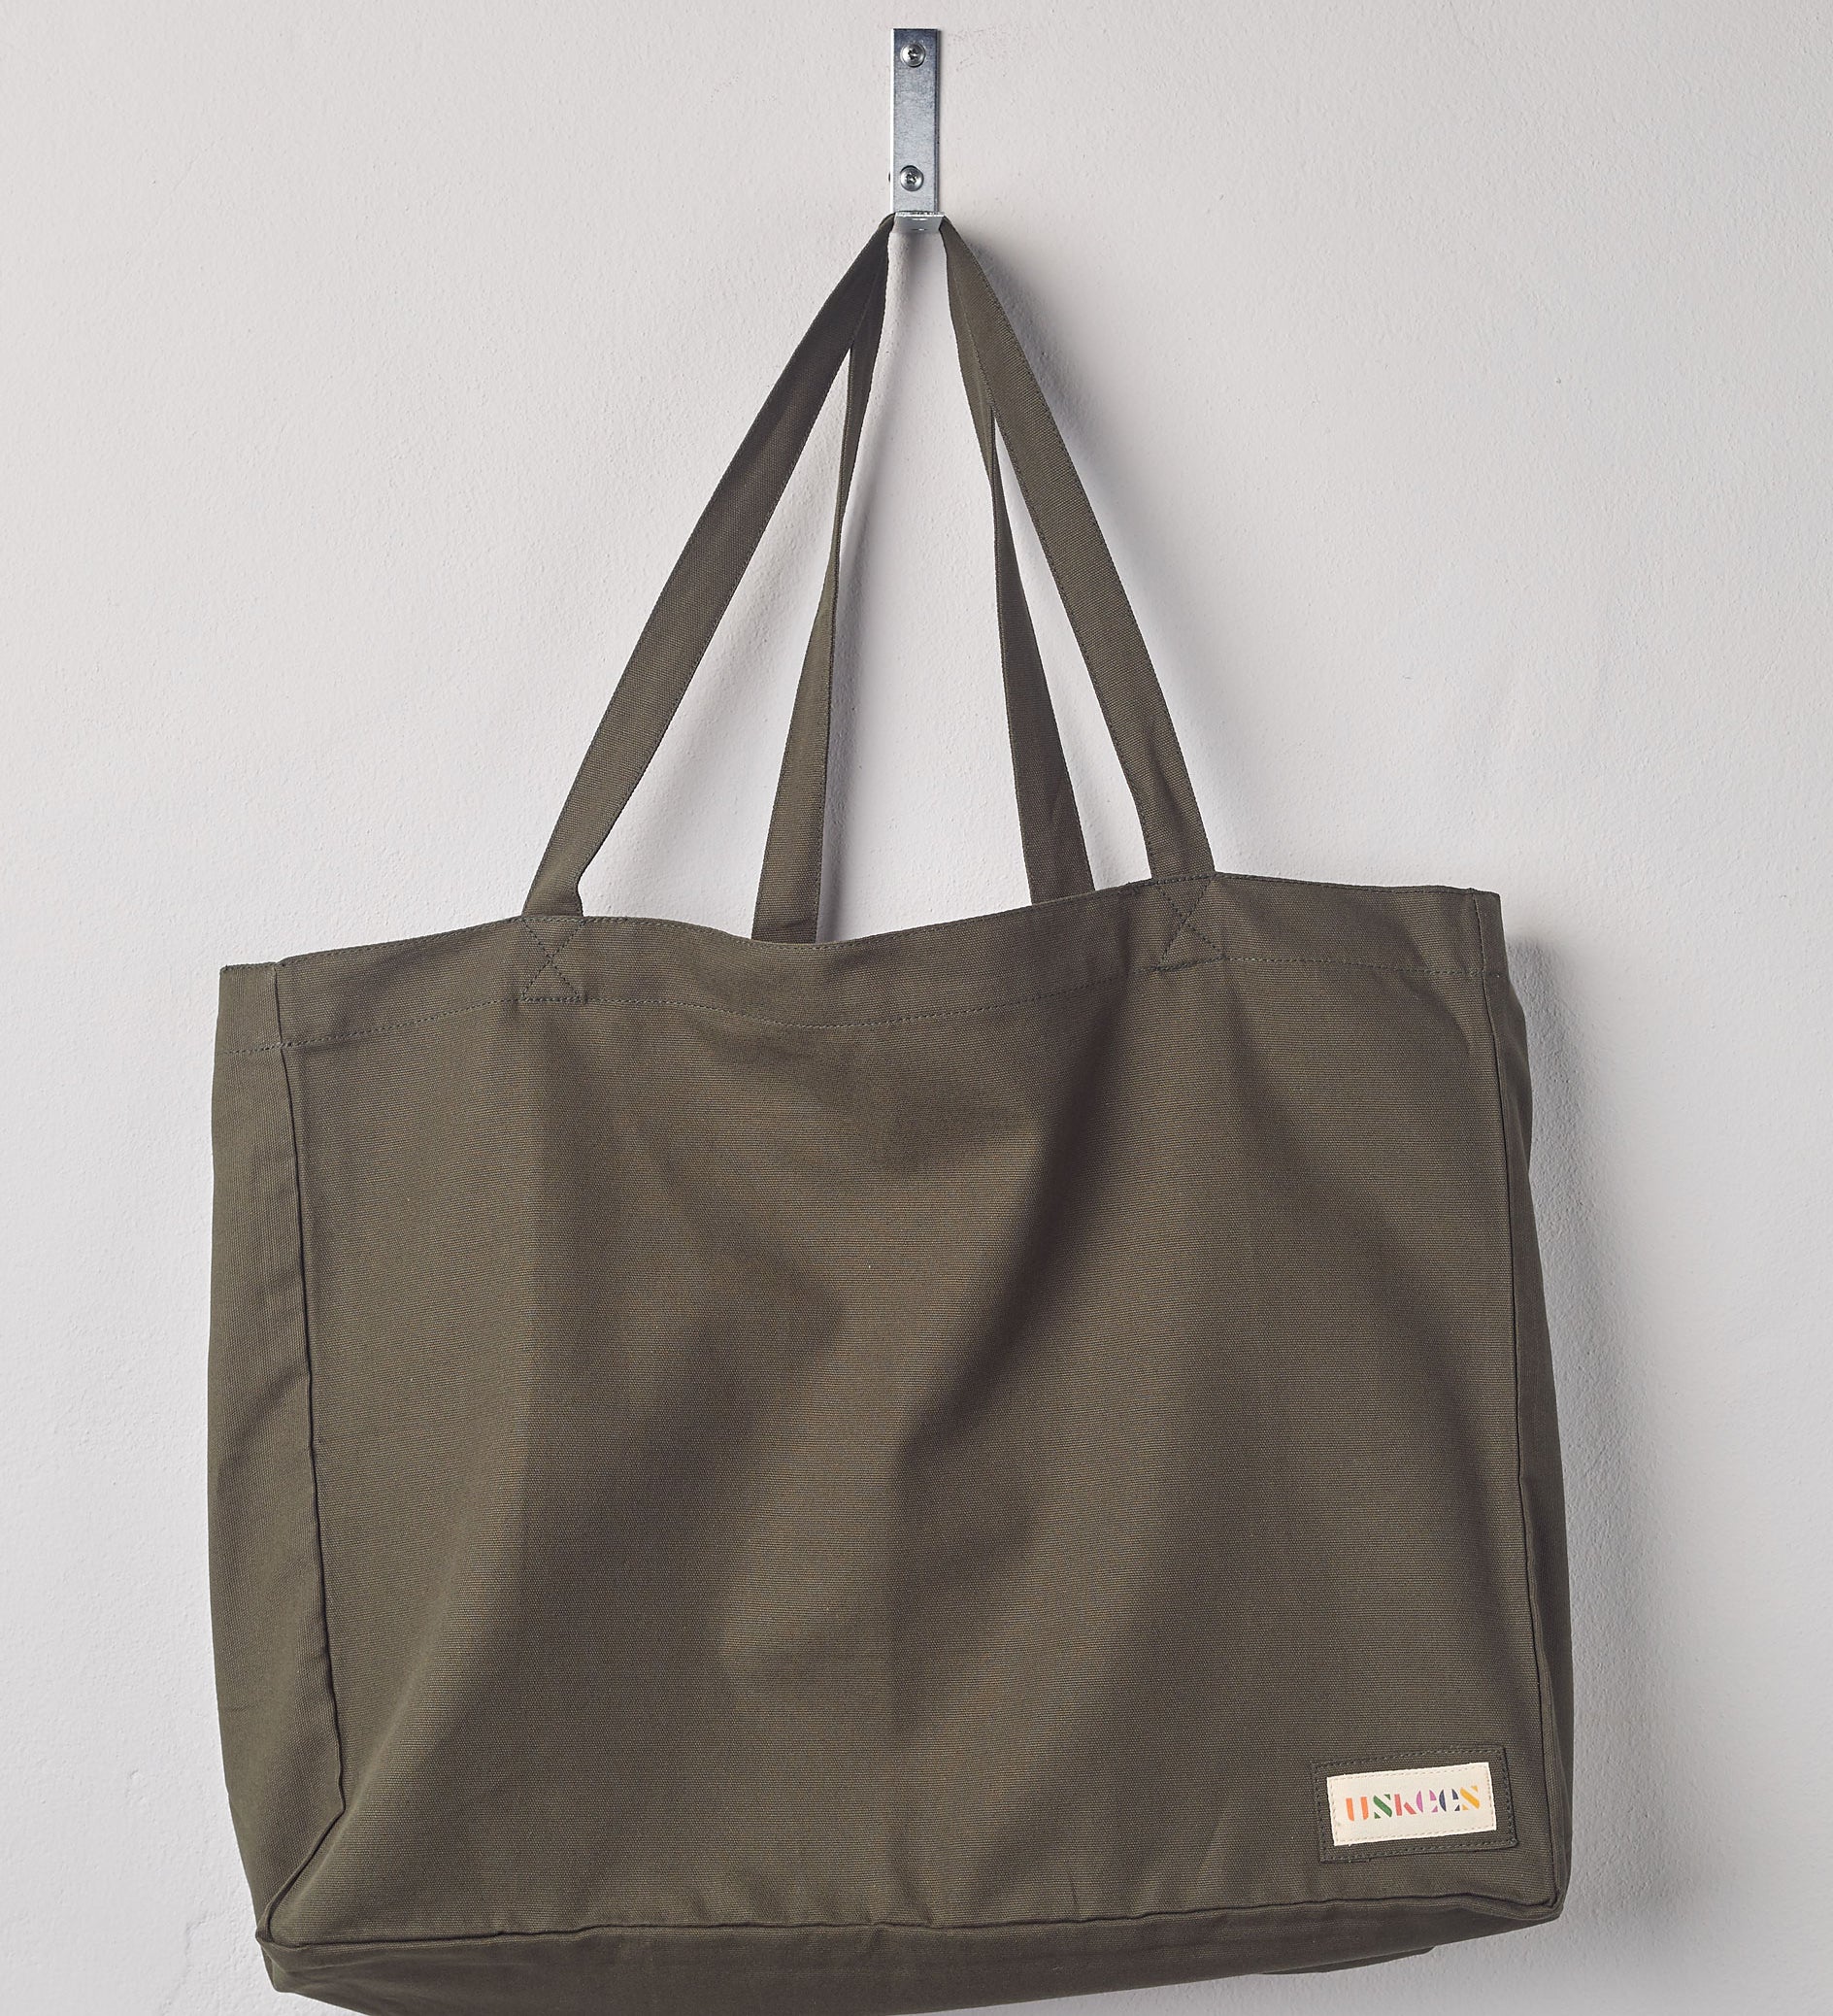 Full, flat view of Uskees #4001, large vine green tote bag, showing twin handles and Uskees woven logo. 